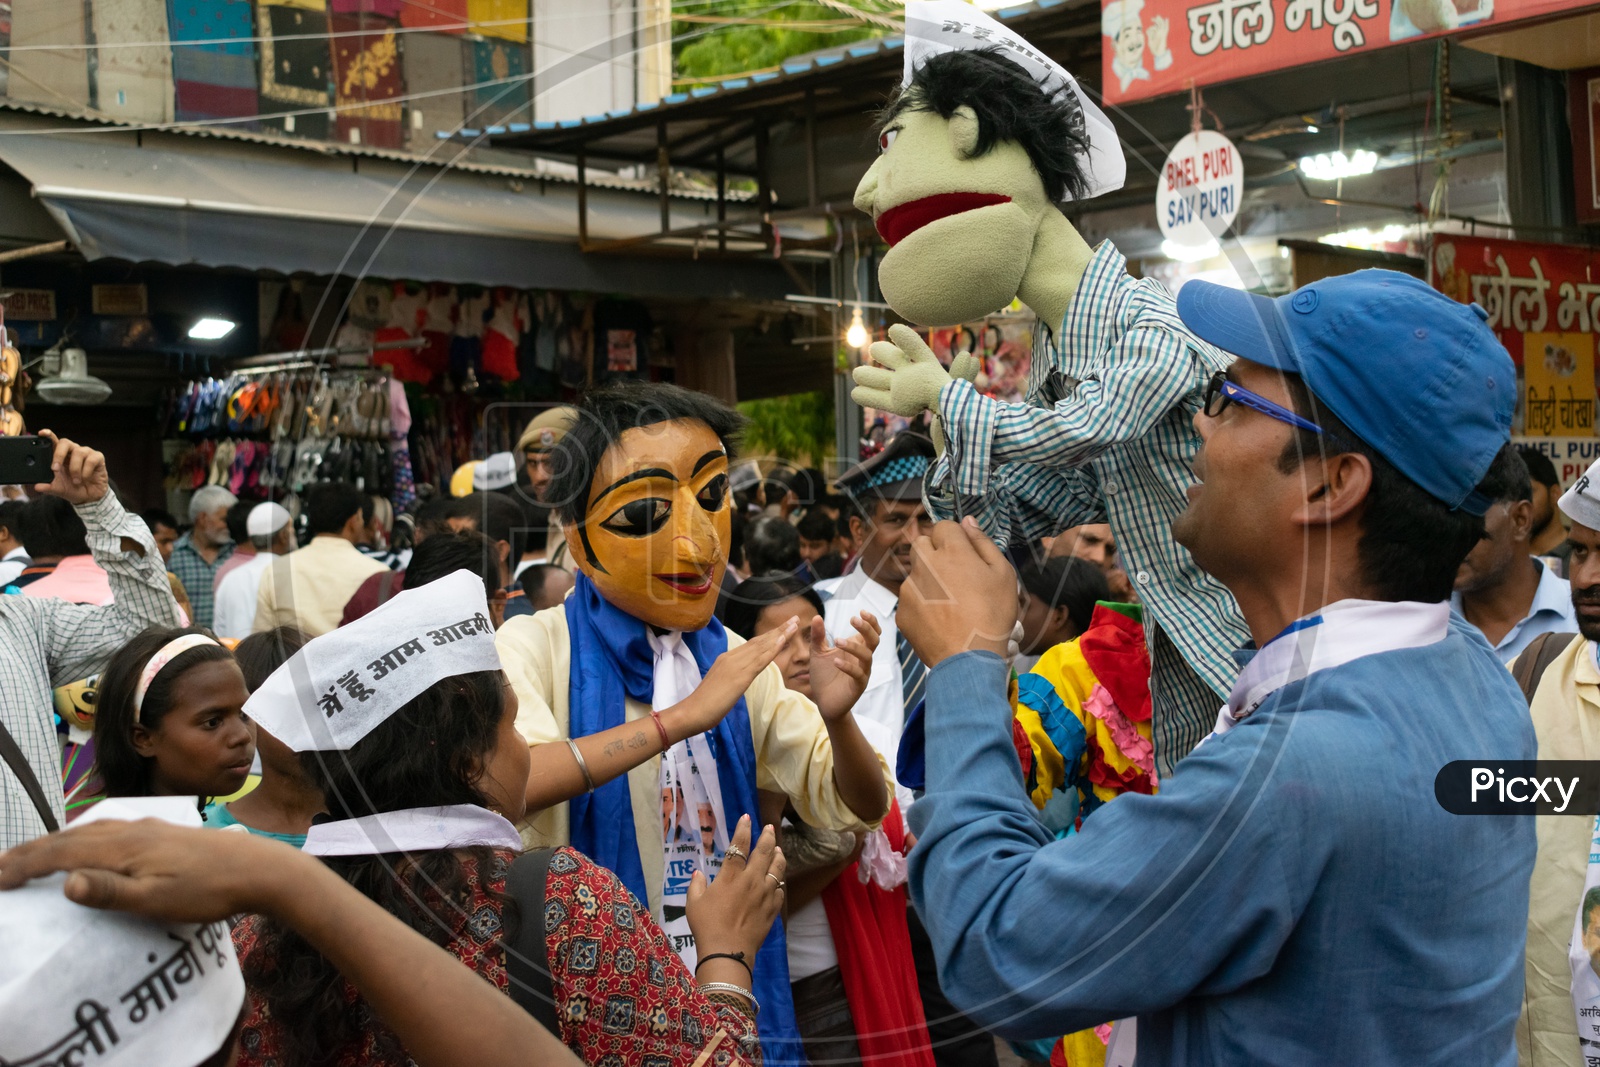 Aam Aadmi Party (AAP) campaign for Lok Shaba election